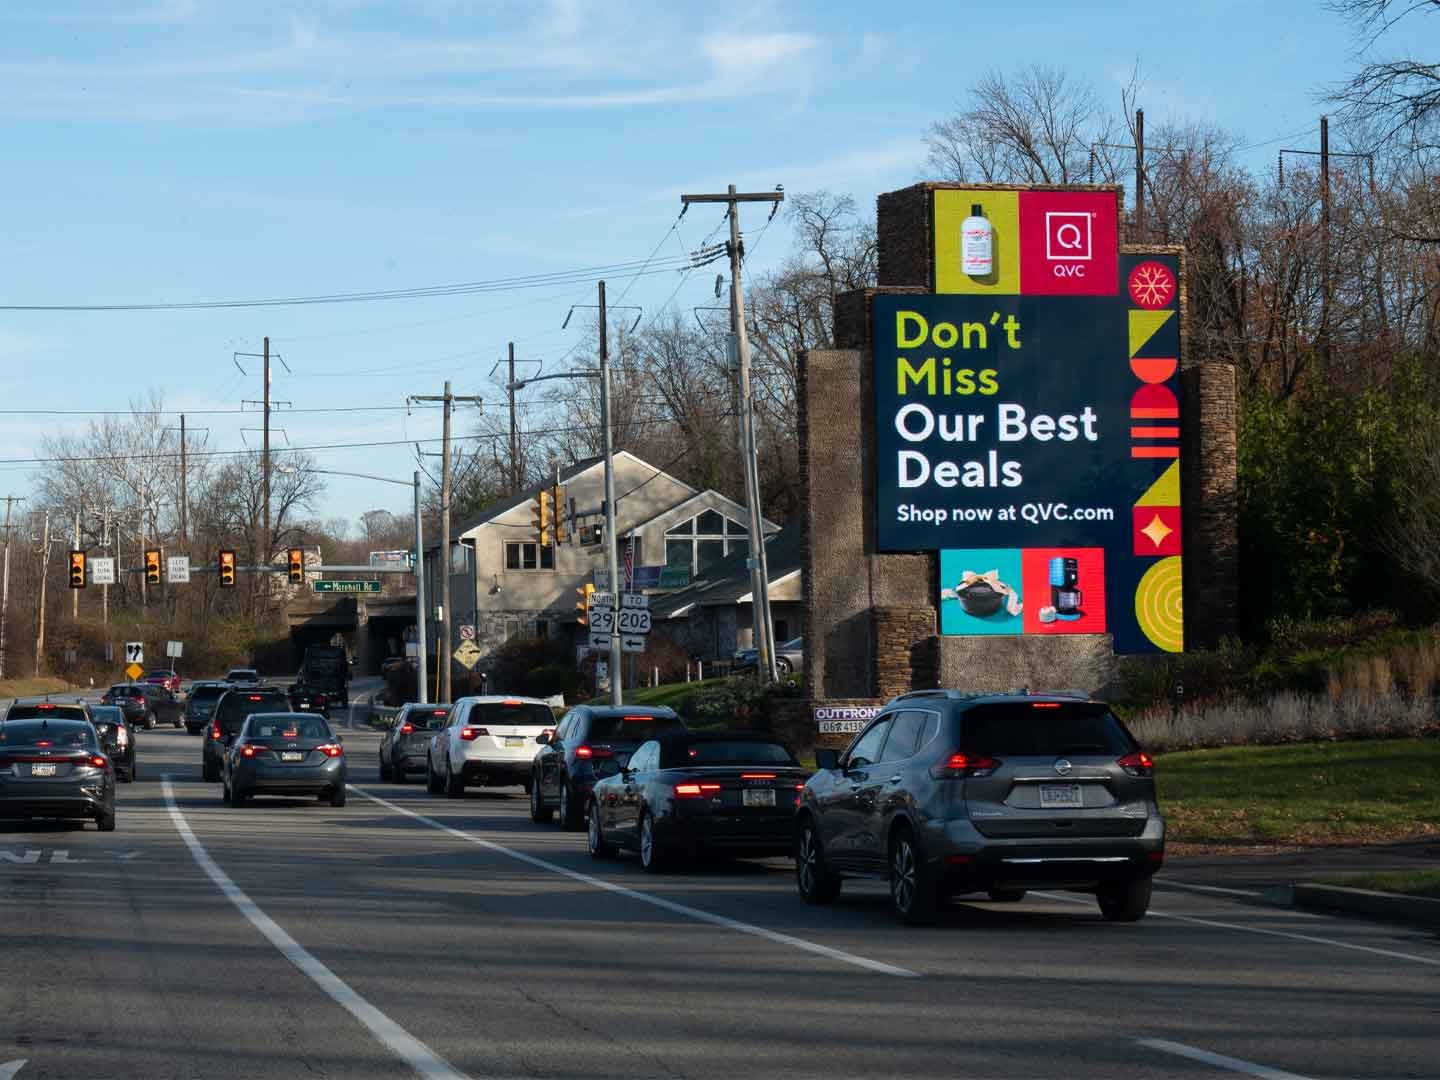 out of home billboard advertising philly qvc